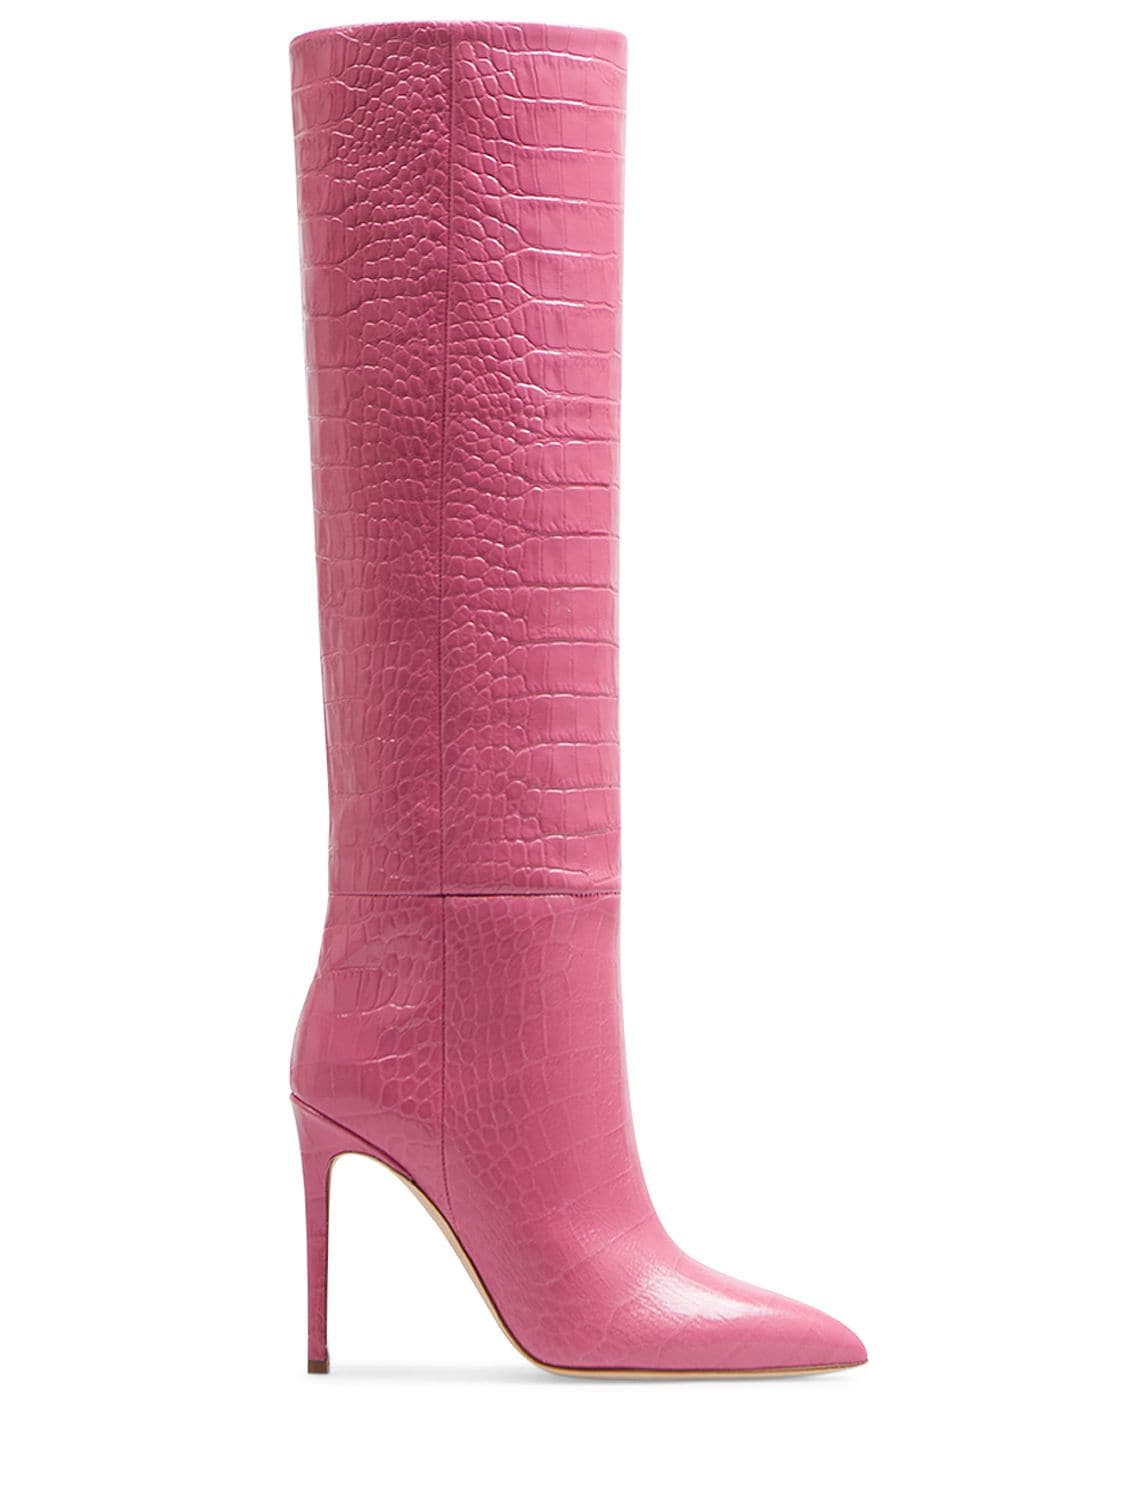 Paris Texas 105mm Croc Embossed Leather Tall Boots In Fuchsia